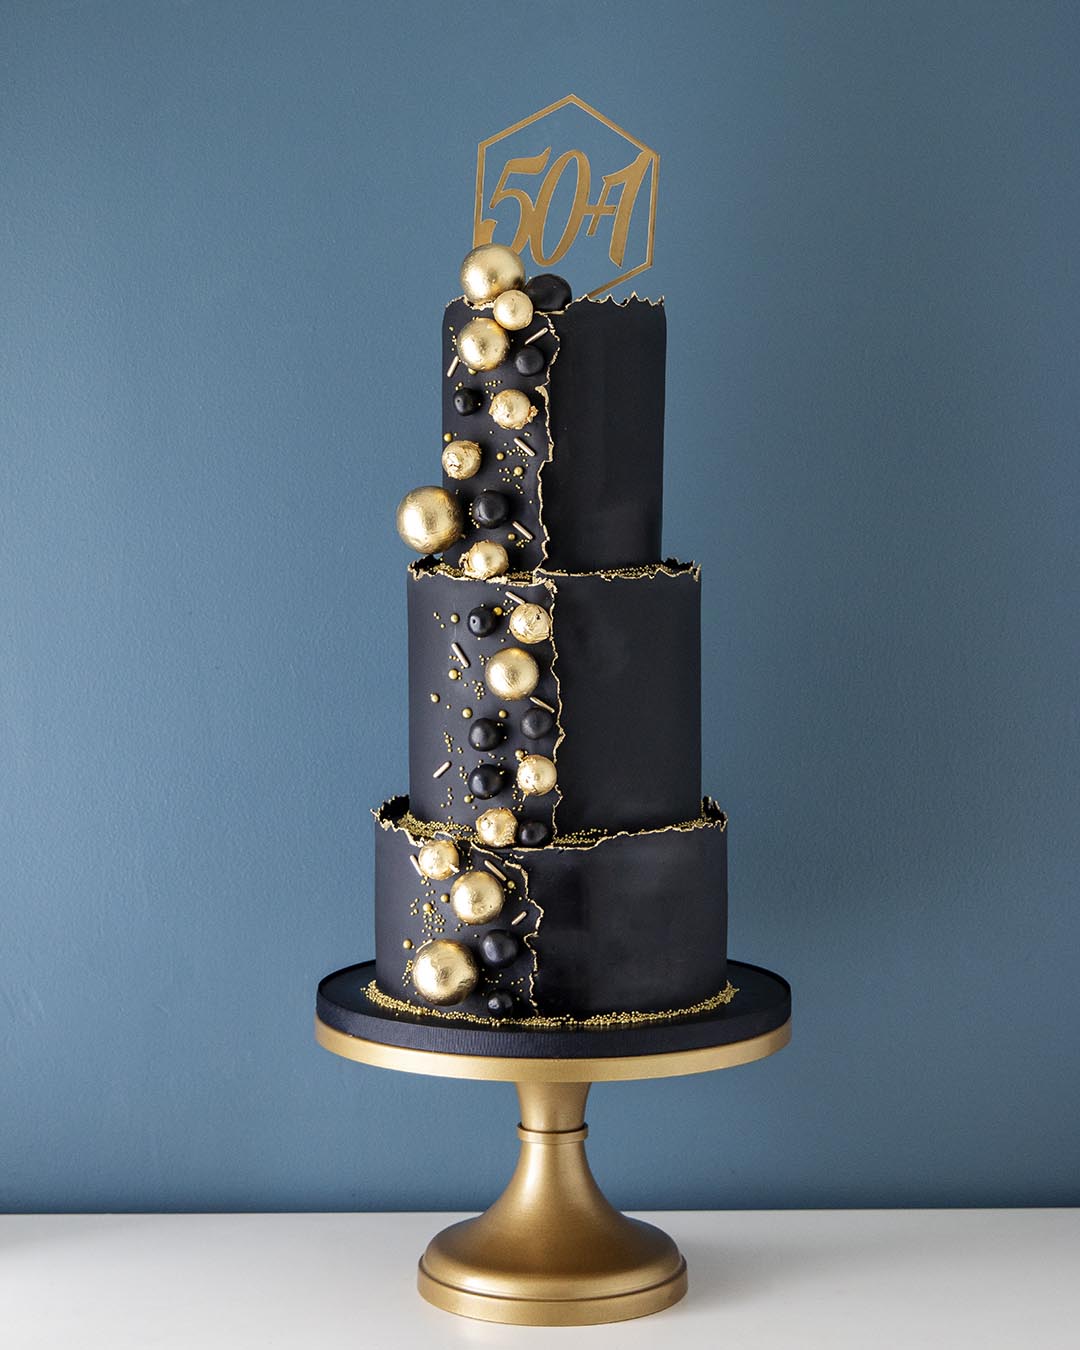 White and gold buttercream cake with gold chocolate dips, 50th birthday,  pearls, flowers | 50th birthday cake images, White birthday cakes, Elegant birthday  cakes